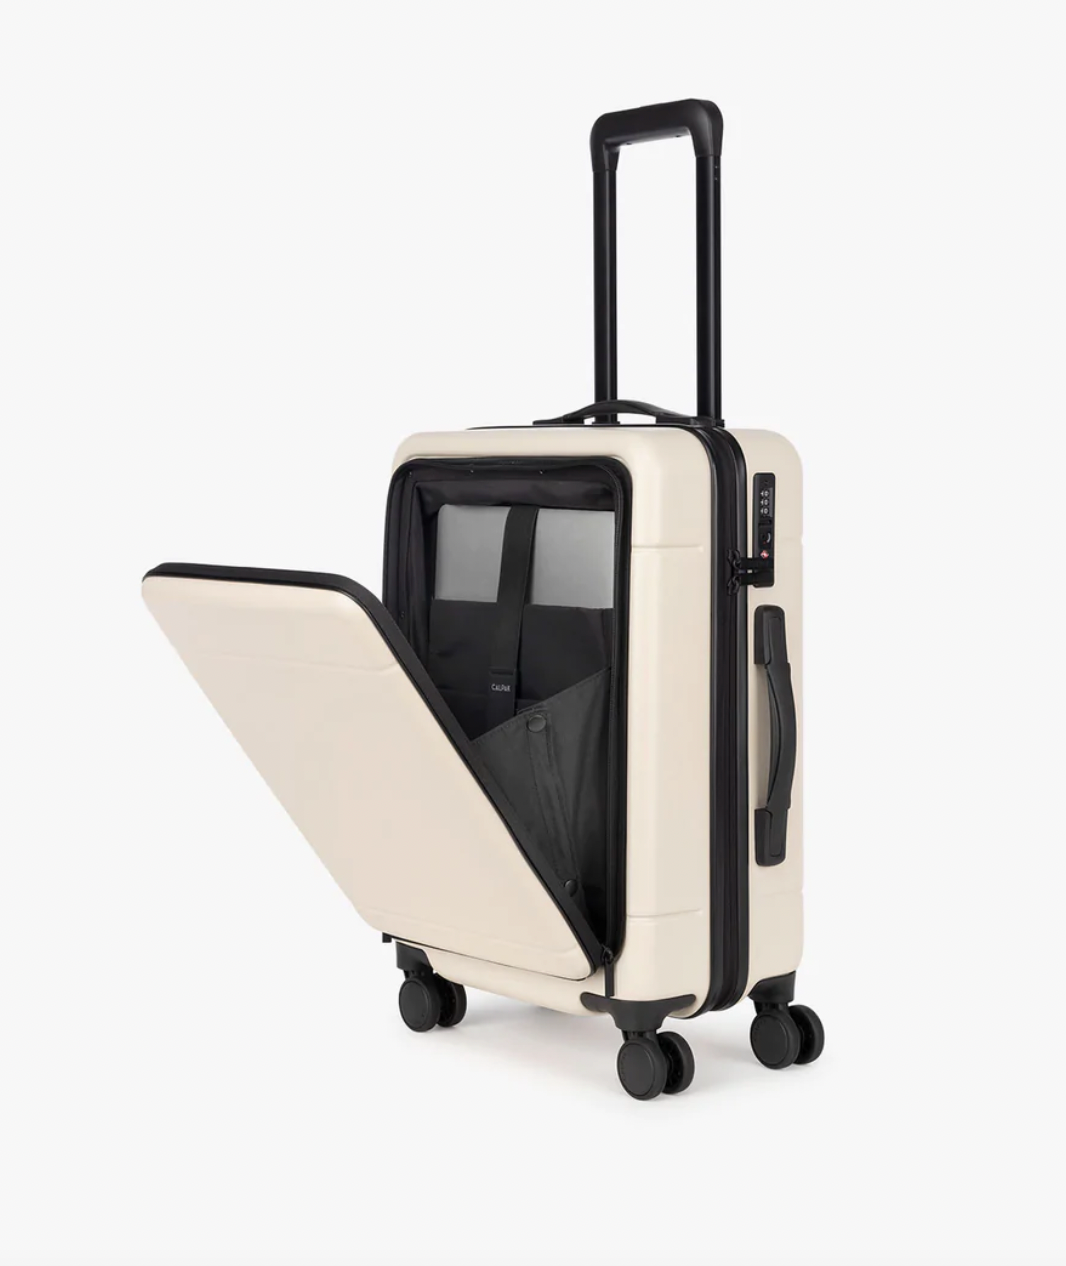 Timus Indigo Spinner Beige 55 cm /20 inch 4 Wheel Trolley Luggage for Travel  Expandable Luggage/Best Bags with inbuilt Combination Lock/Best Waterproof Travel  Bag for Men/Cabin Luggage : Amazon.in: Fashion